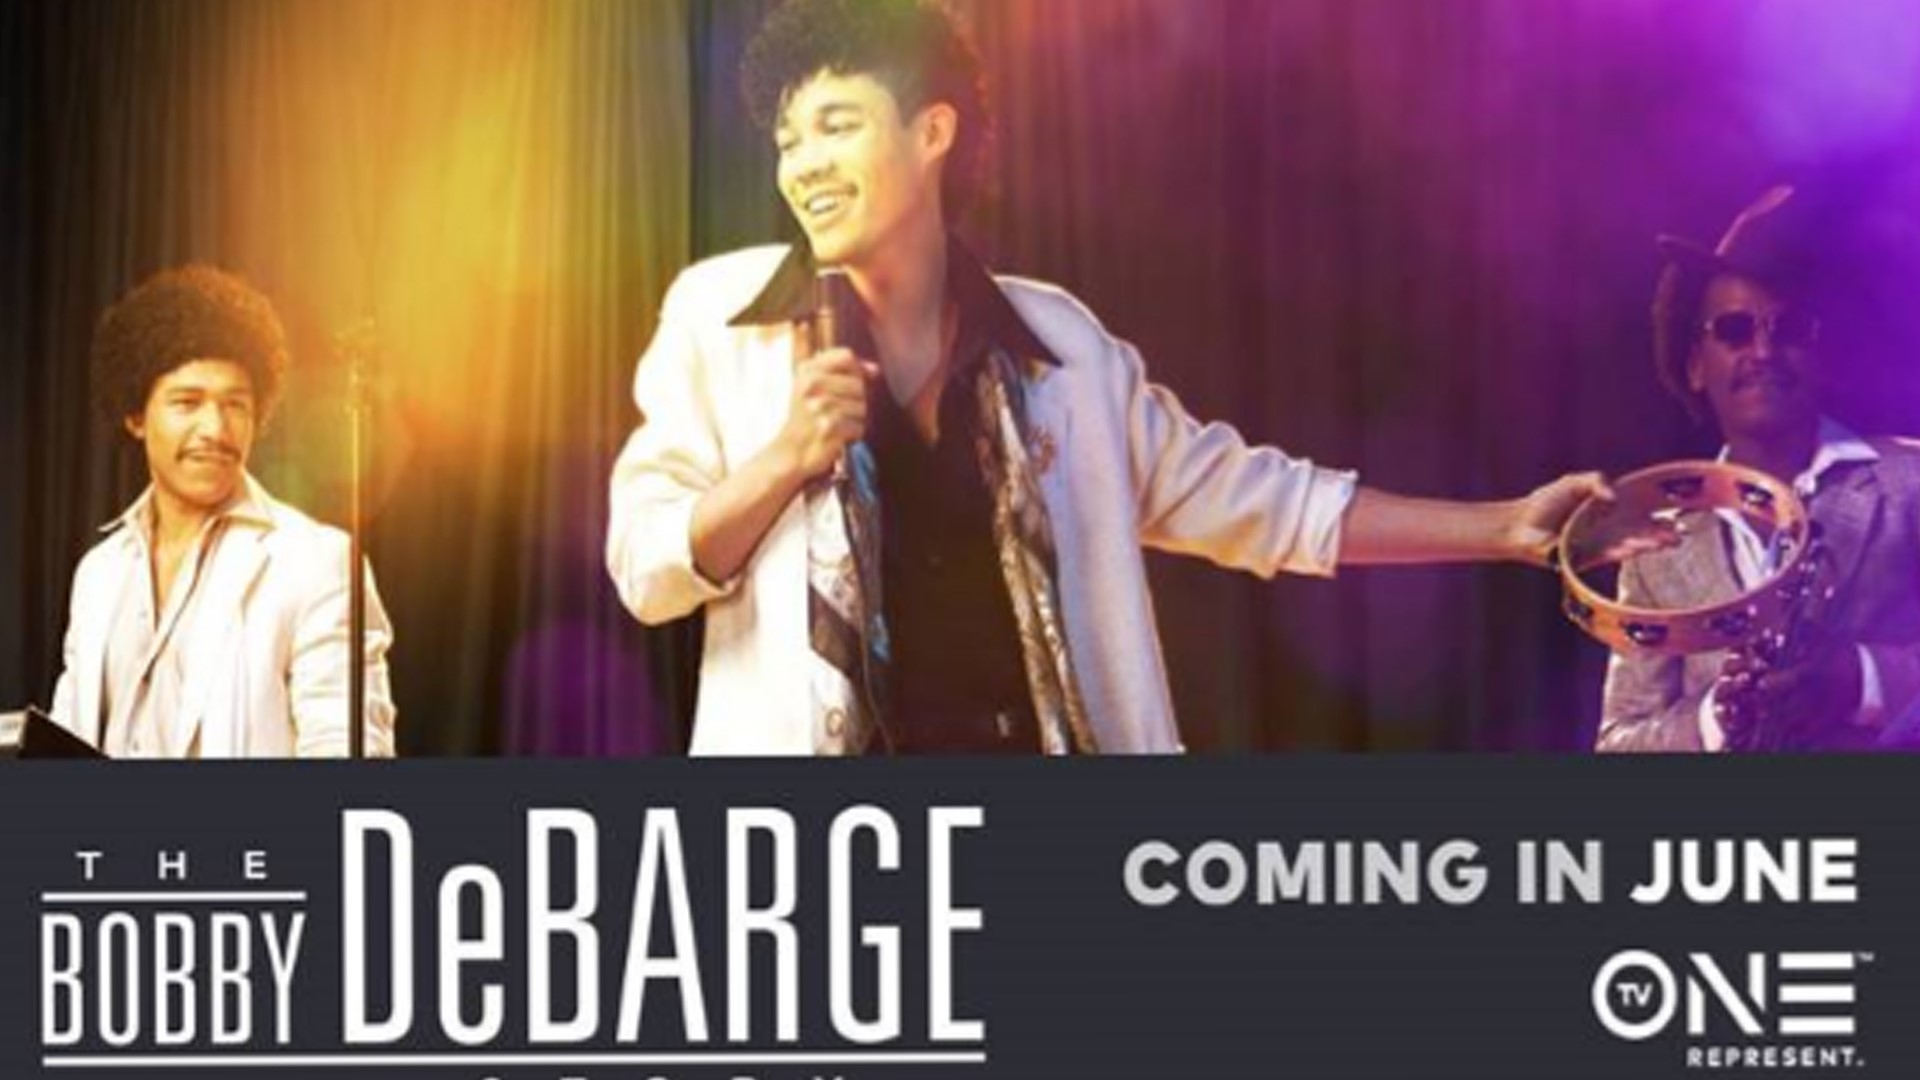 TV One has announced that production is underway in Atlanta for its new original film “The Bobby DeBarge Story,” slated to premiere in June 2019.